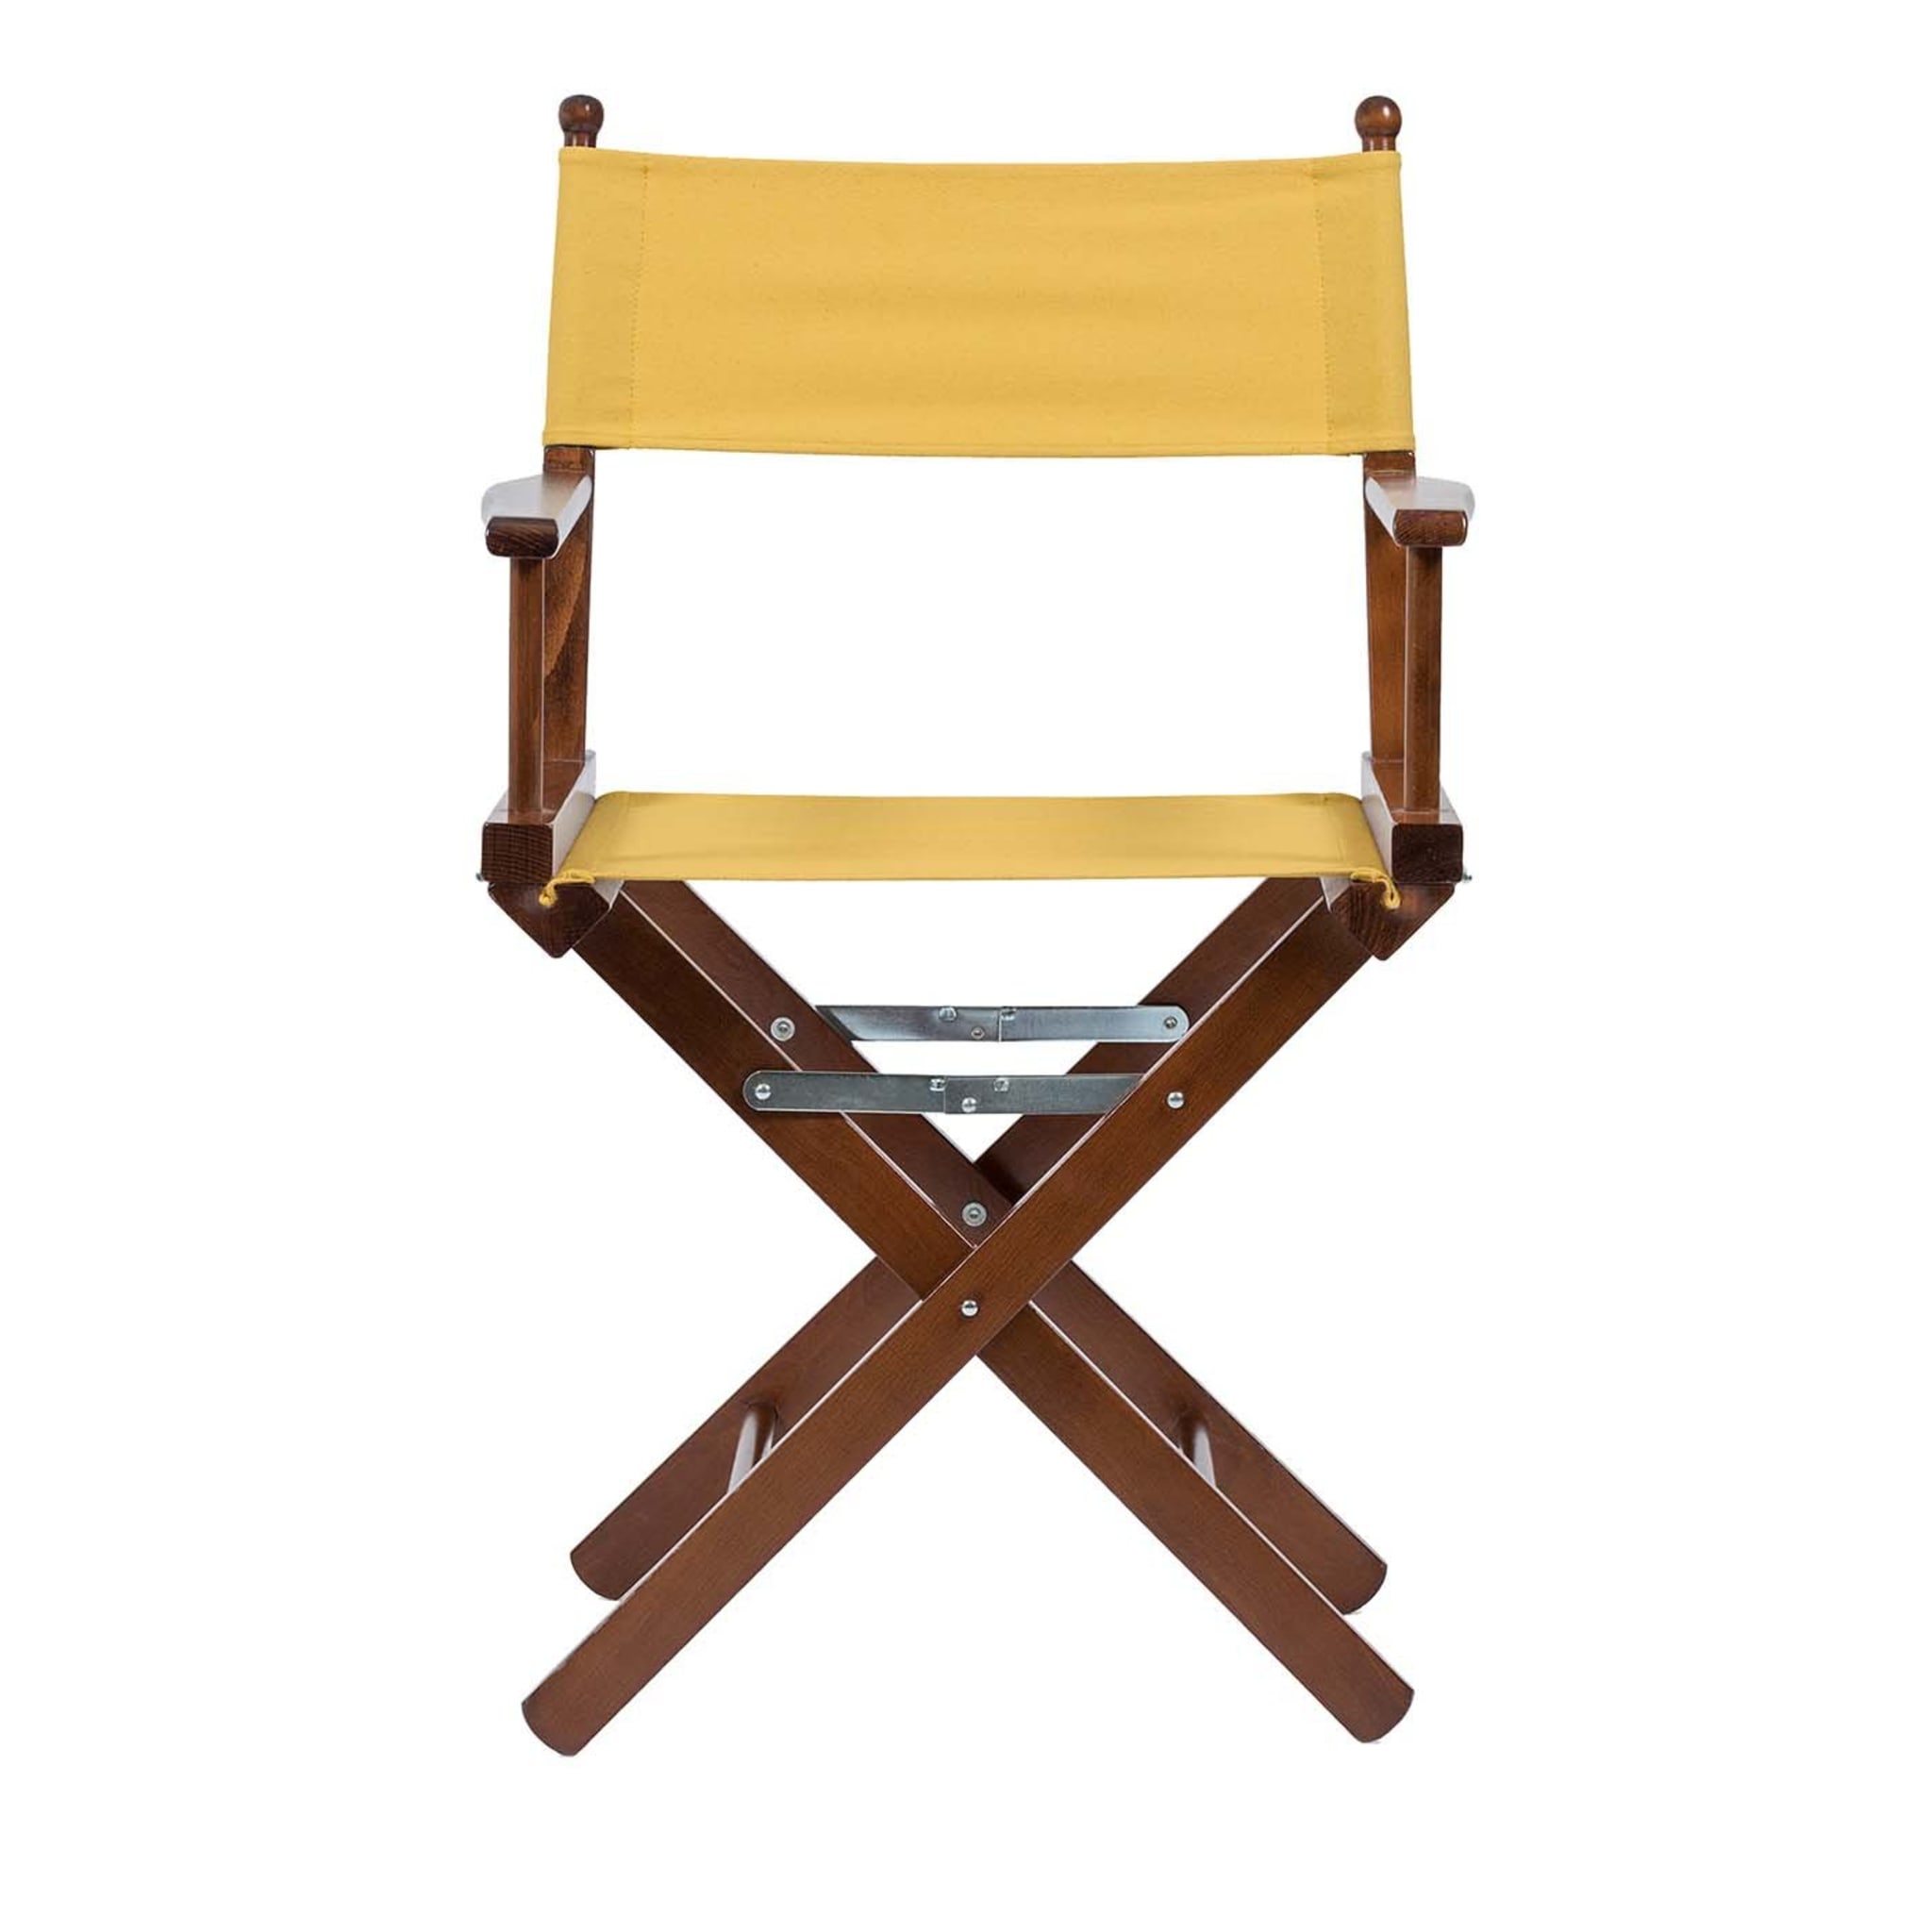 Director's Chair in Mustard Yellow - Main view